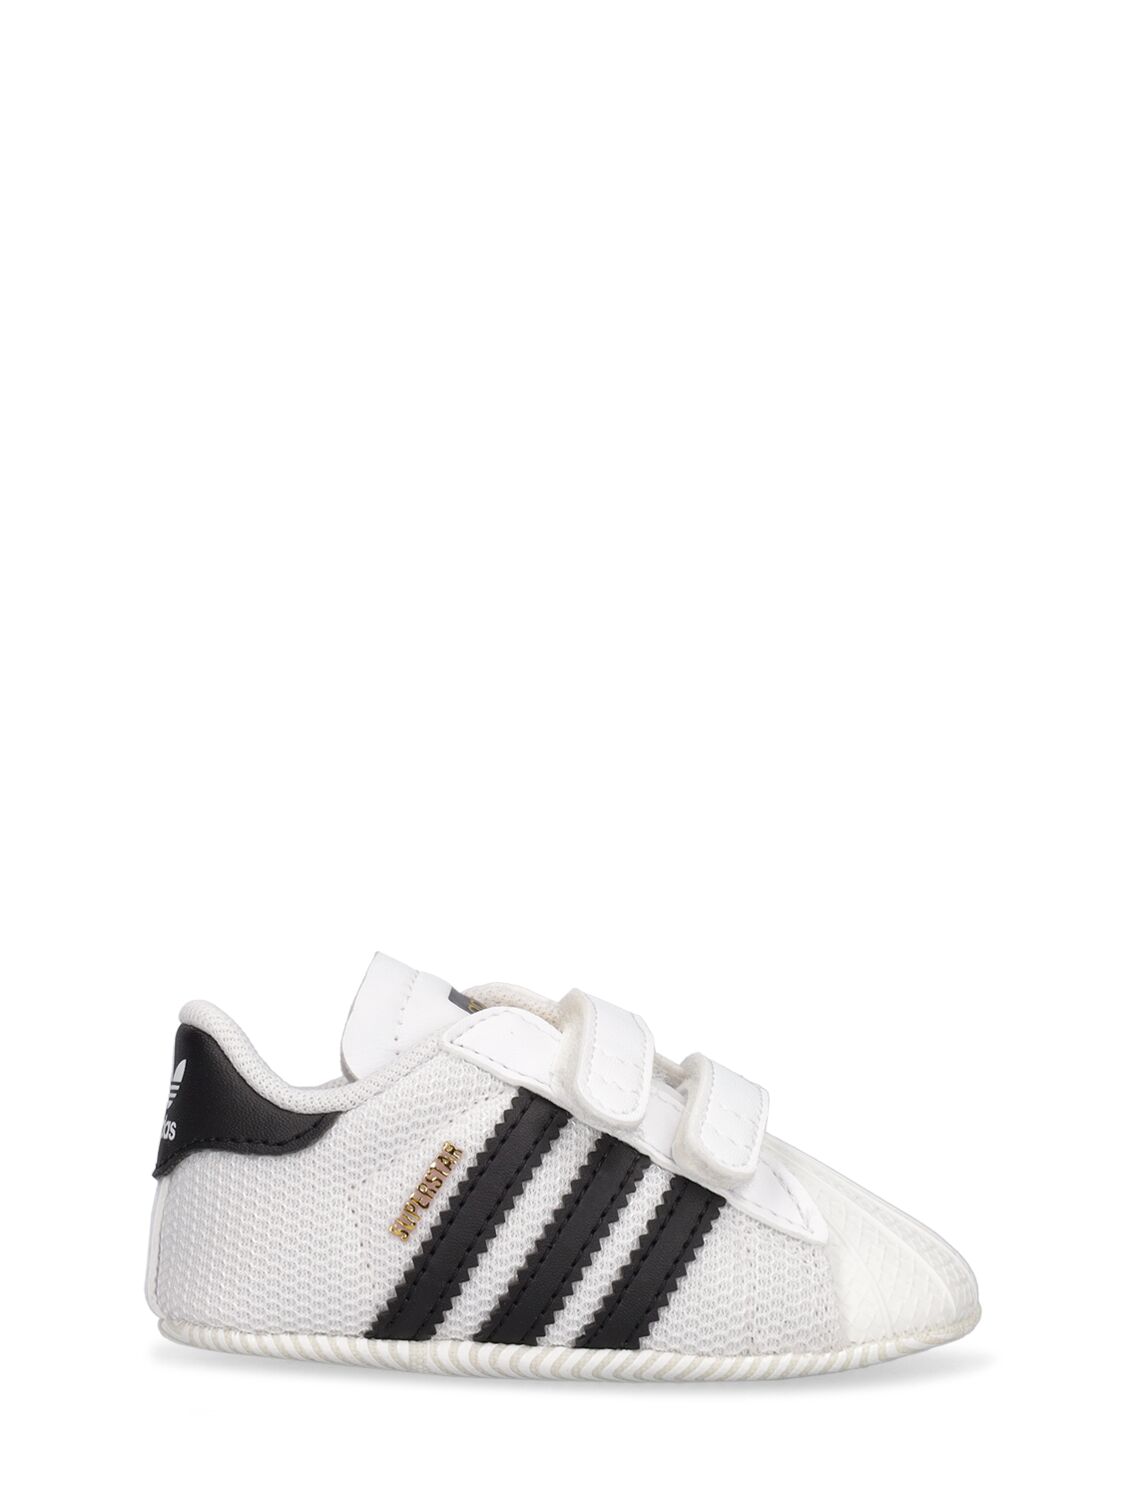 ADIDAS ORIGINALS SUPERSTAR CRIB FAUX LEATHER SNEAKERS